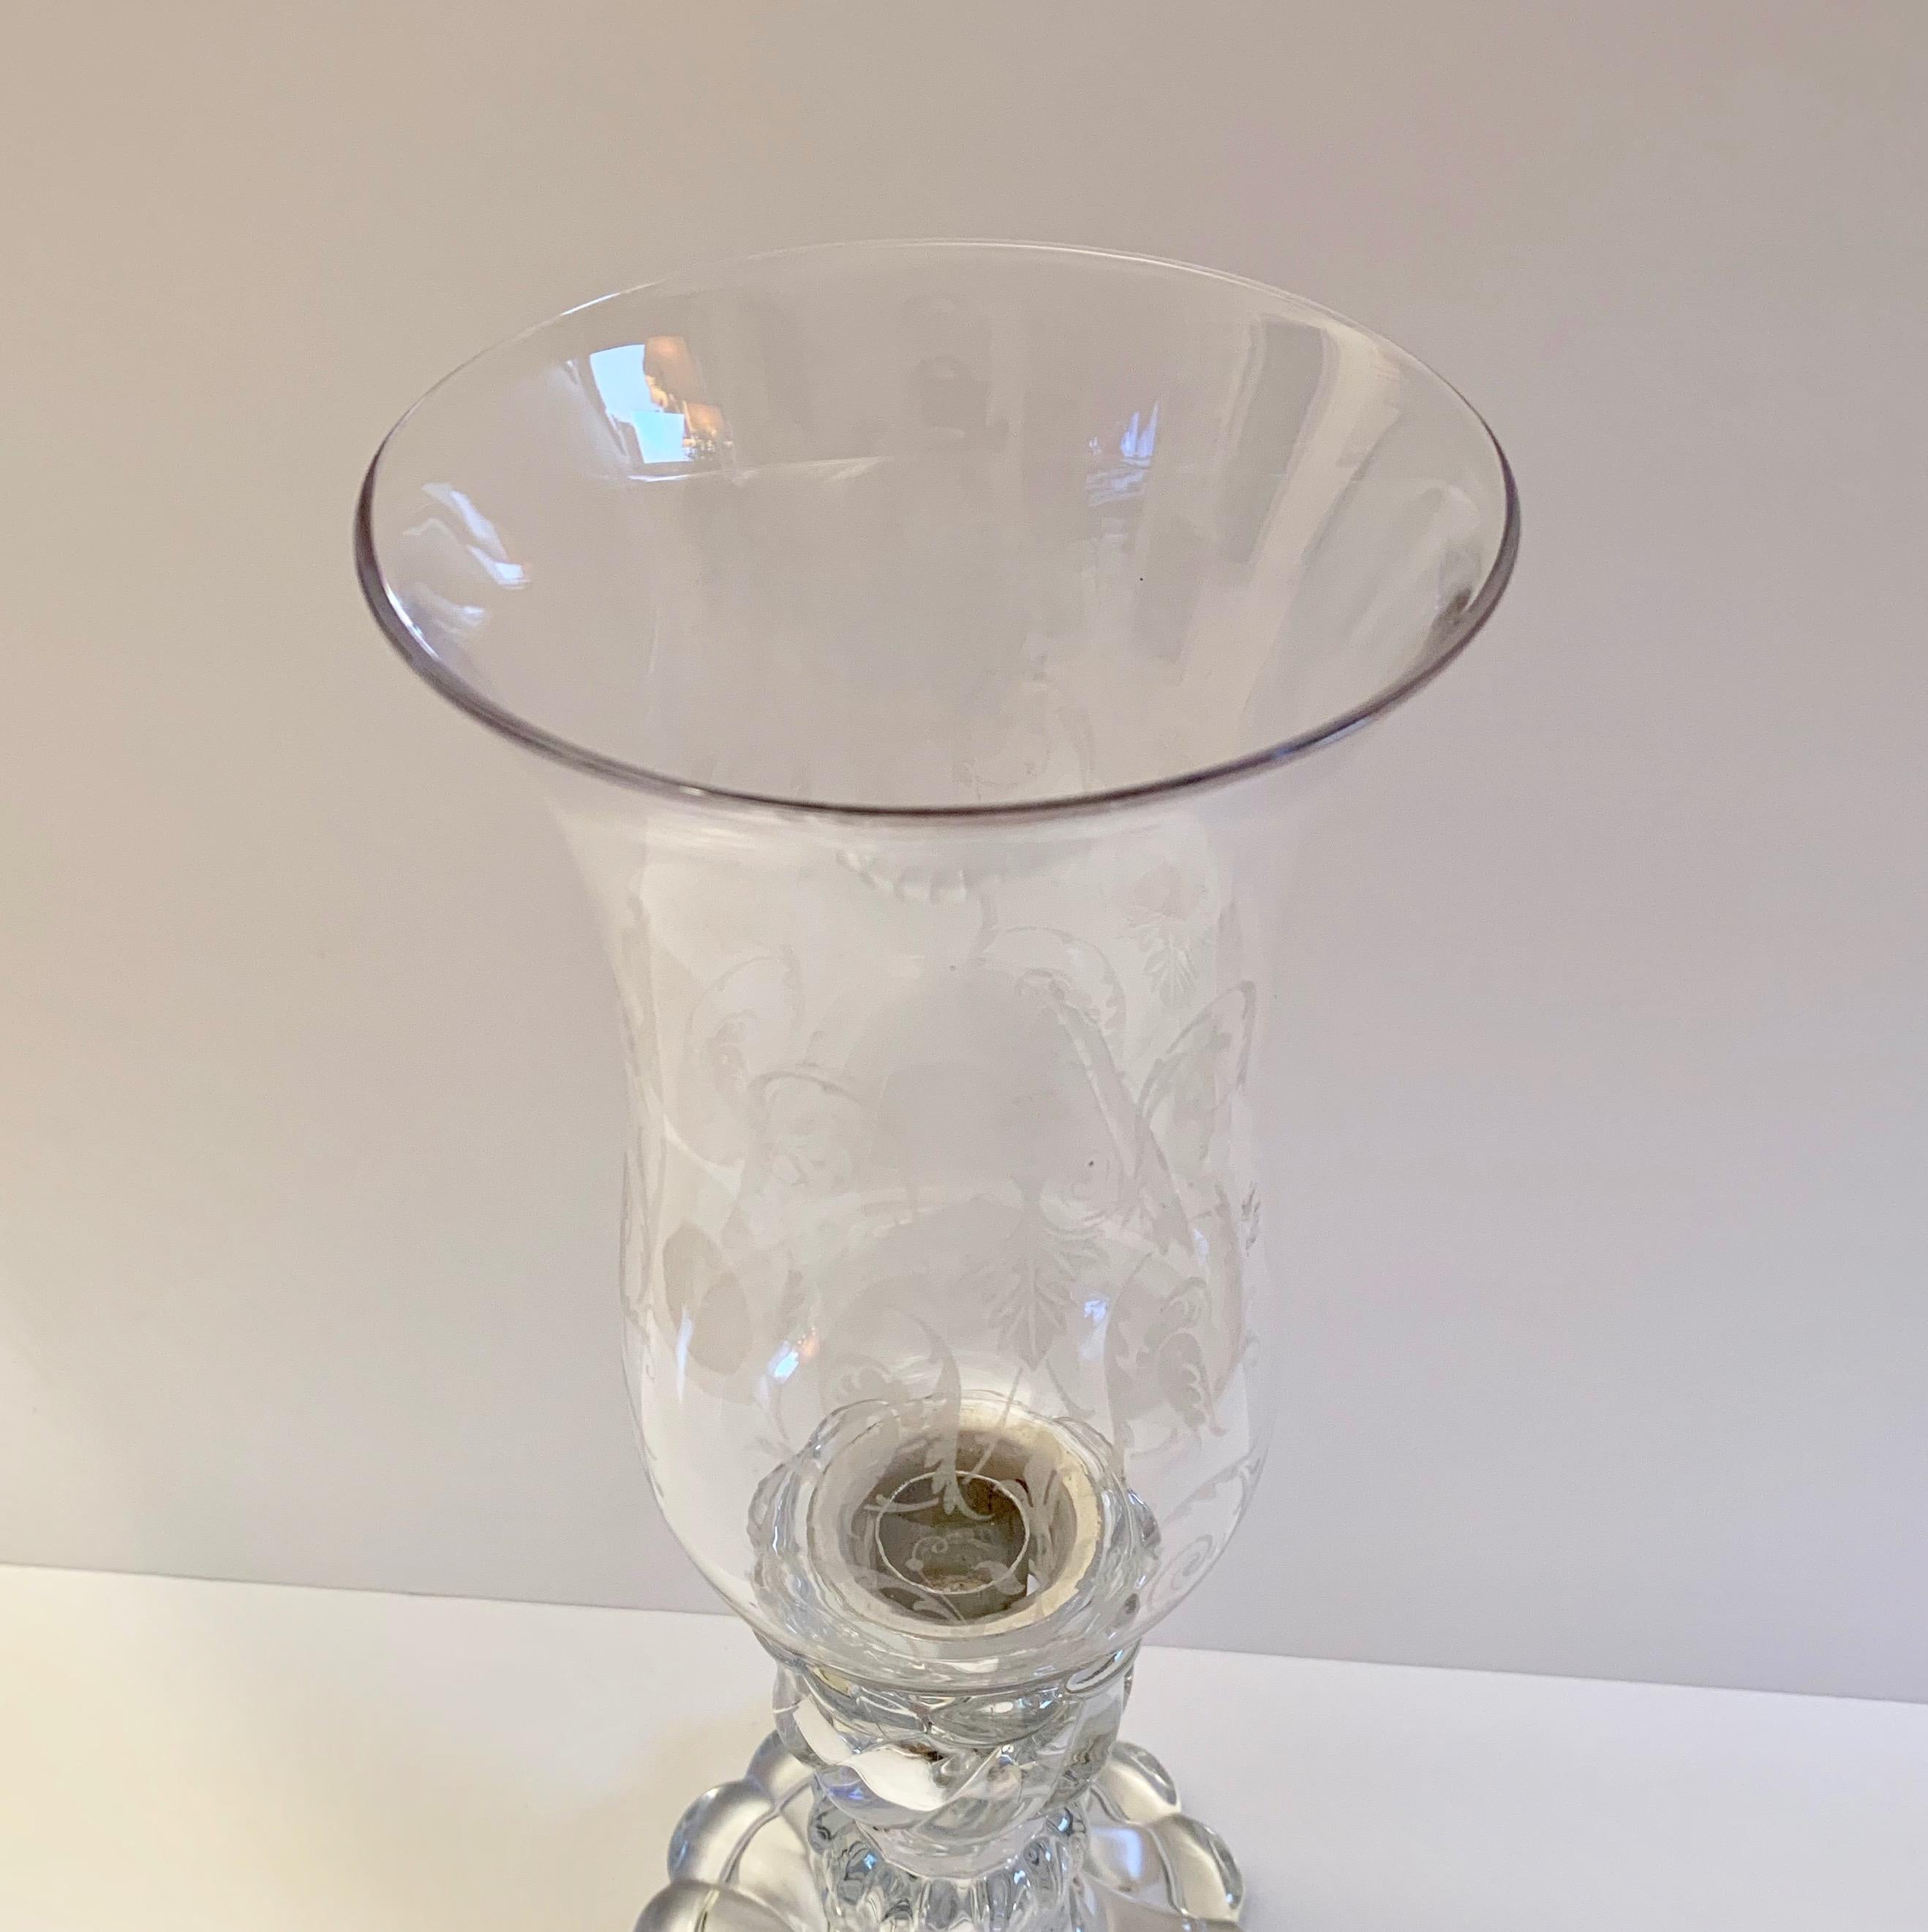 A single Baccarat candleholder in bamboo swirl design with an etched glass storm shade.
Please note that the storm shade is not from manufacture Baccarat and only the stand is. The storm shade has been specially modified in order to fit the